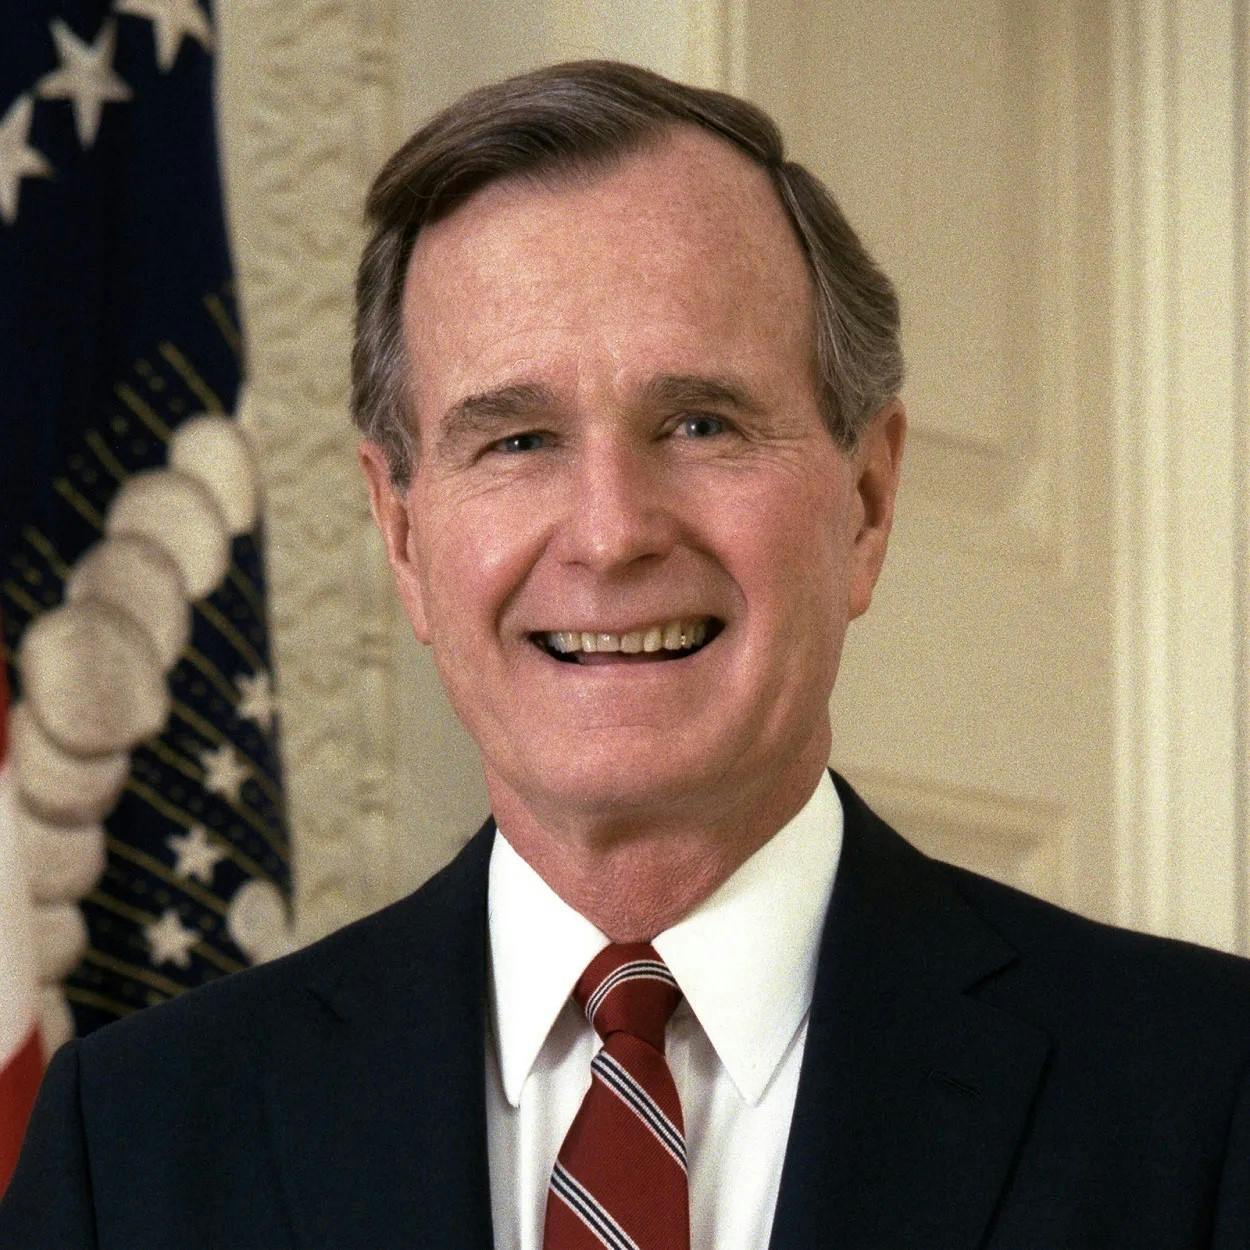 Extra: Dana Perino And Jean Becker On The Life And Legacy Of President George H.W. Bush